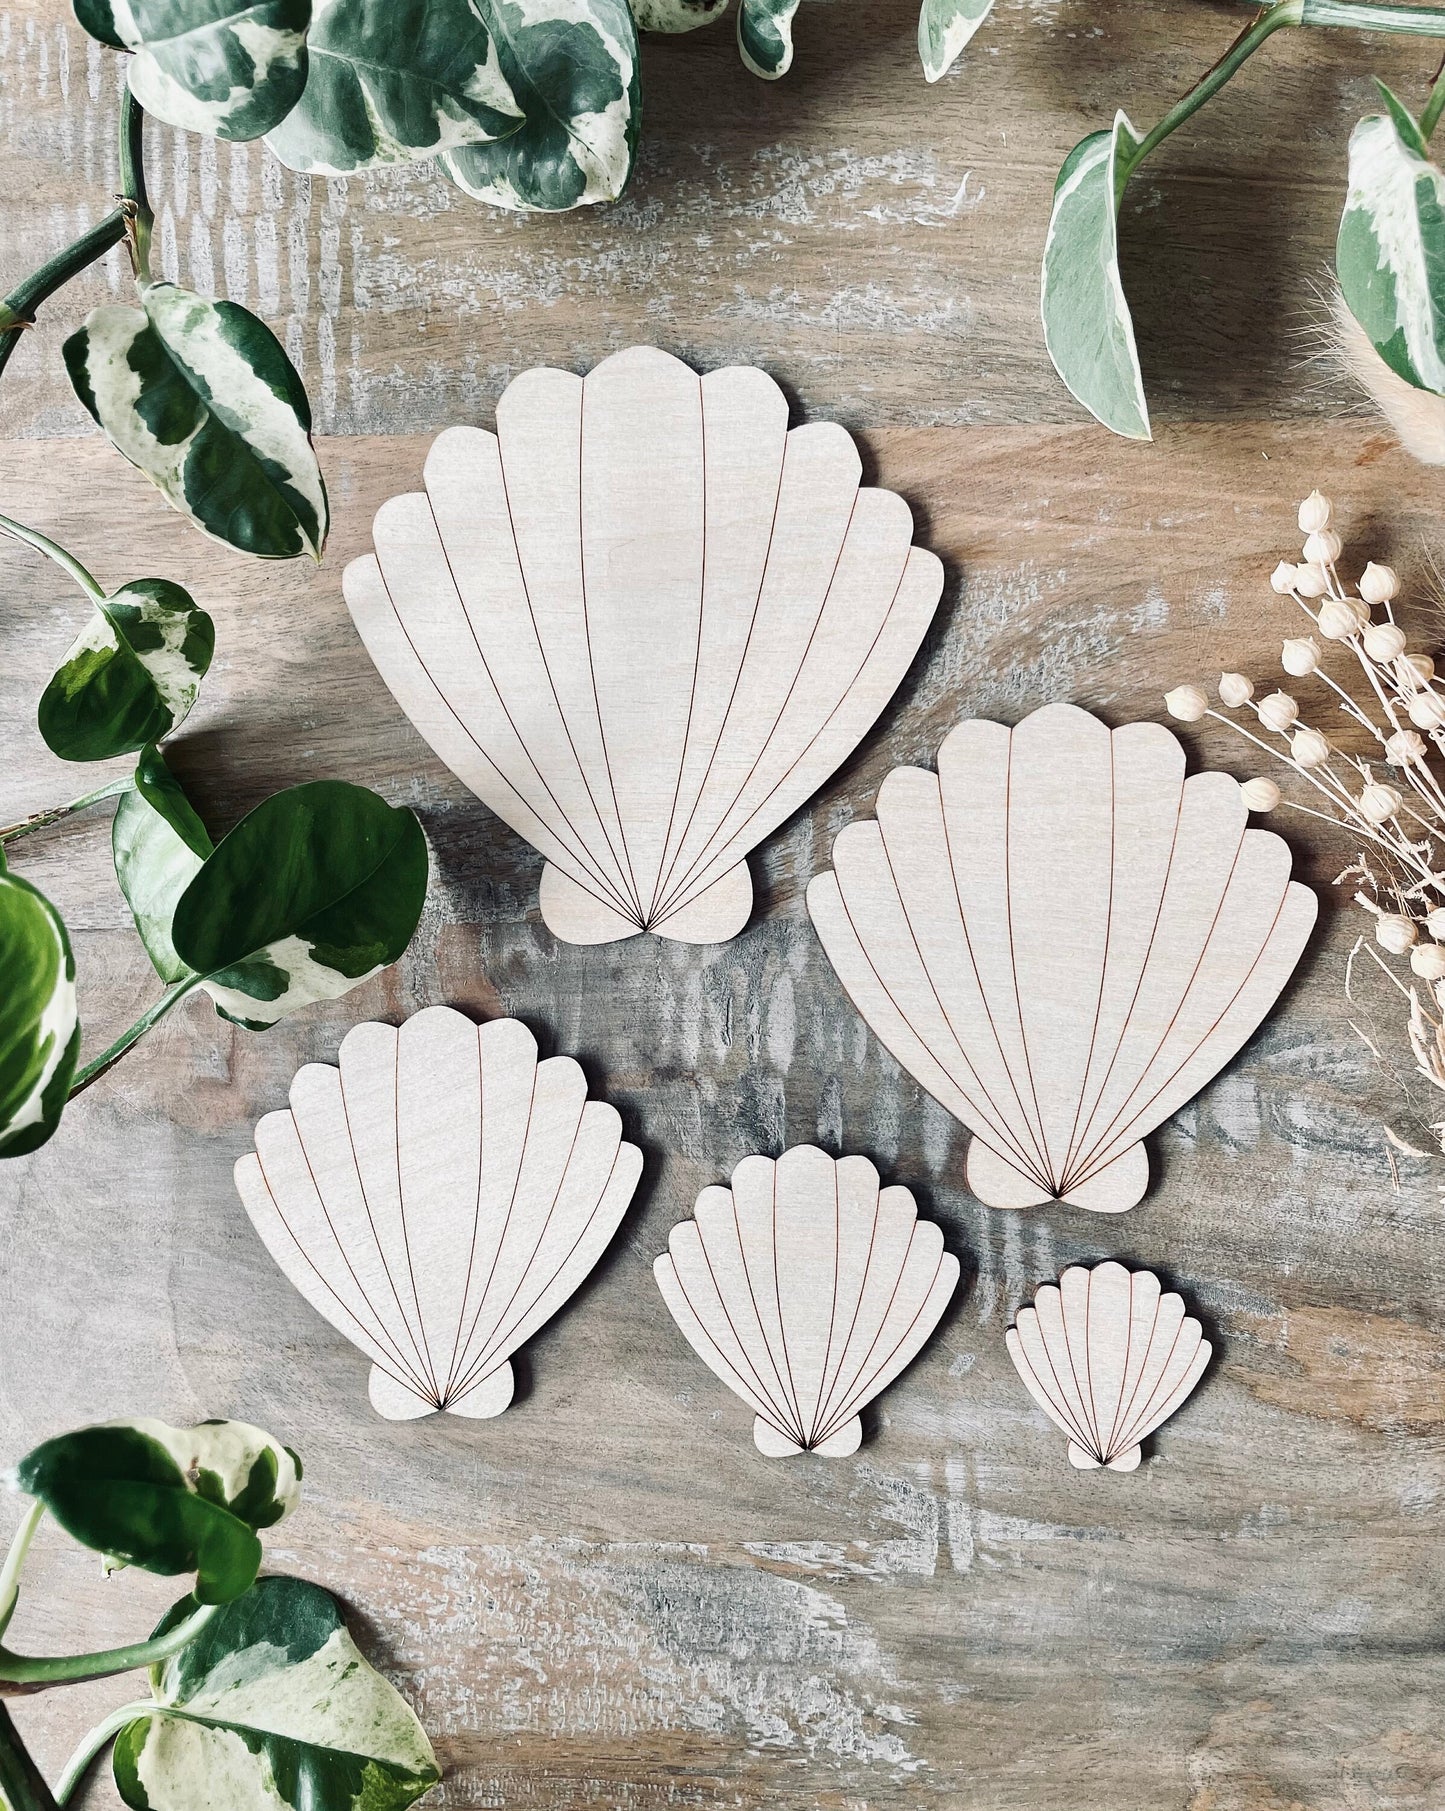 10x Wooden Seashell Shapes from 40mm Tall | 3mm Thick Laser Cut Plywood Blanks | Craft Shapes